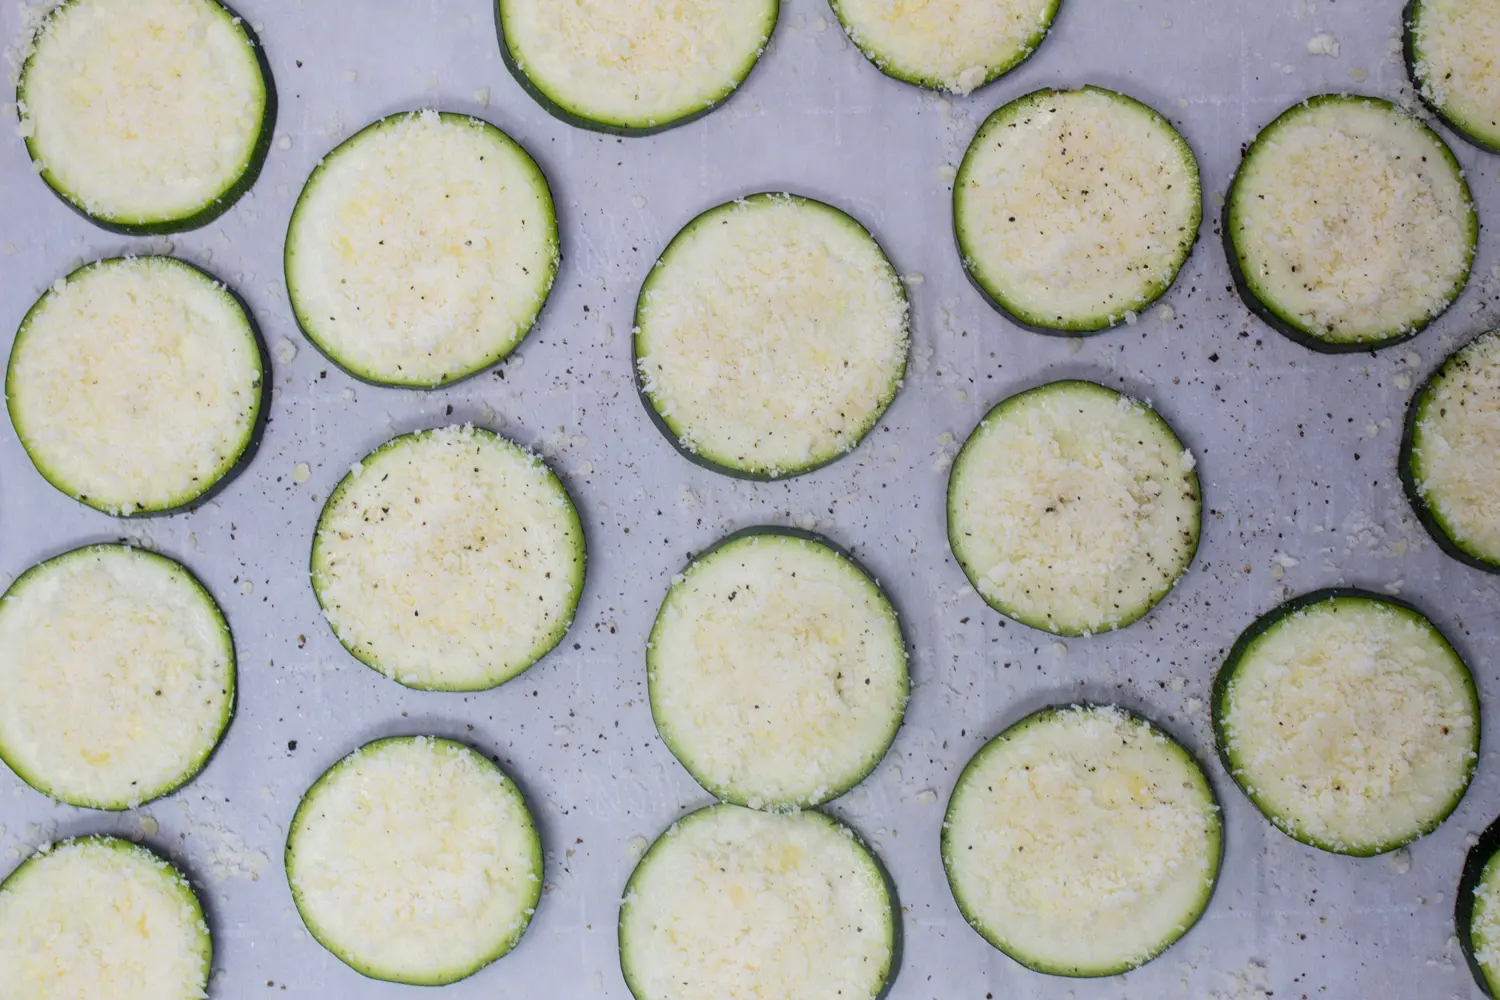 zucchini sliced in rounds laid out on baking sheet and seasoned with salt and pepper then topped with grated parmesan cheese